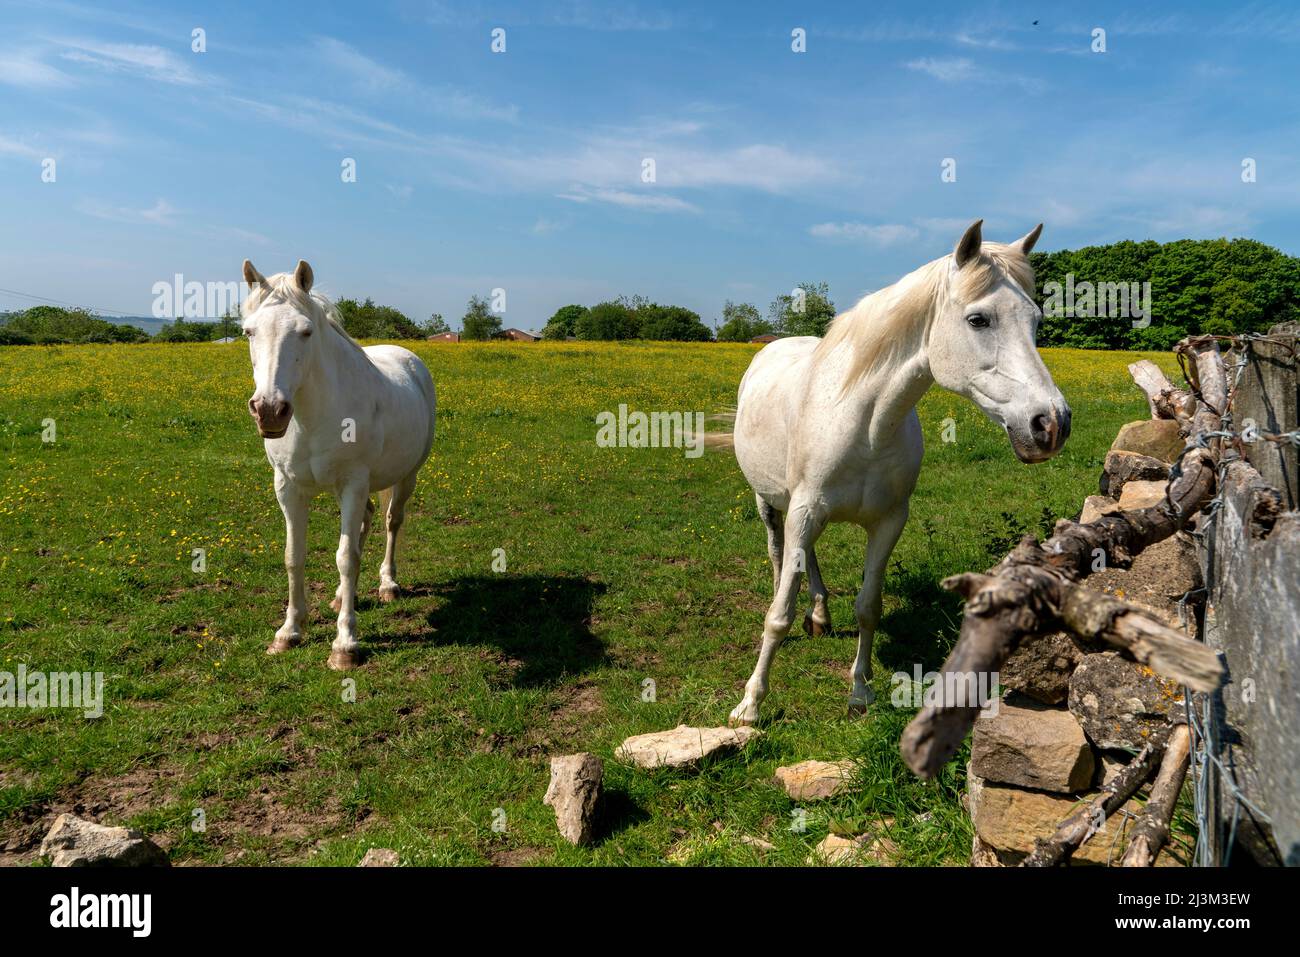 Two light palomino horses in the English countryside; Ravensworth, Richmondshire, England Stock Photo